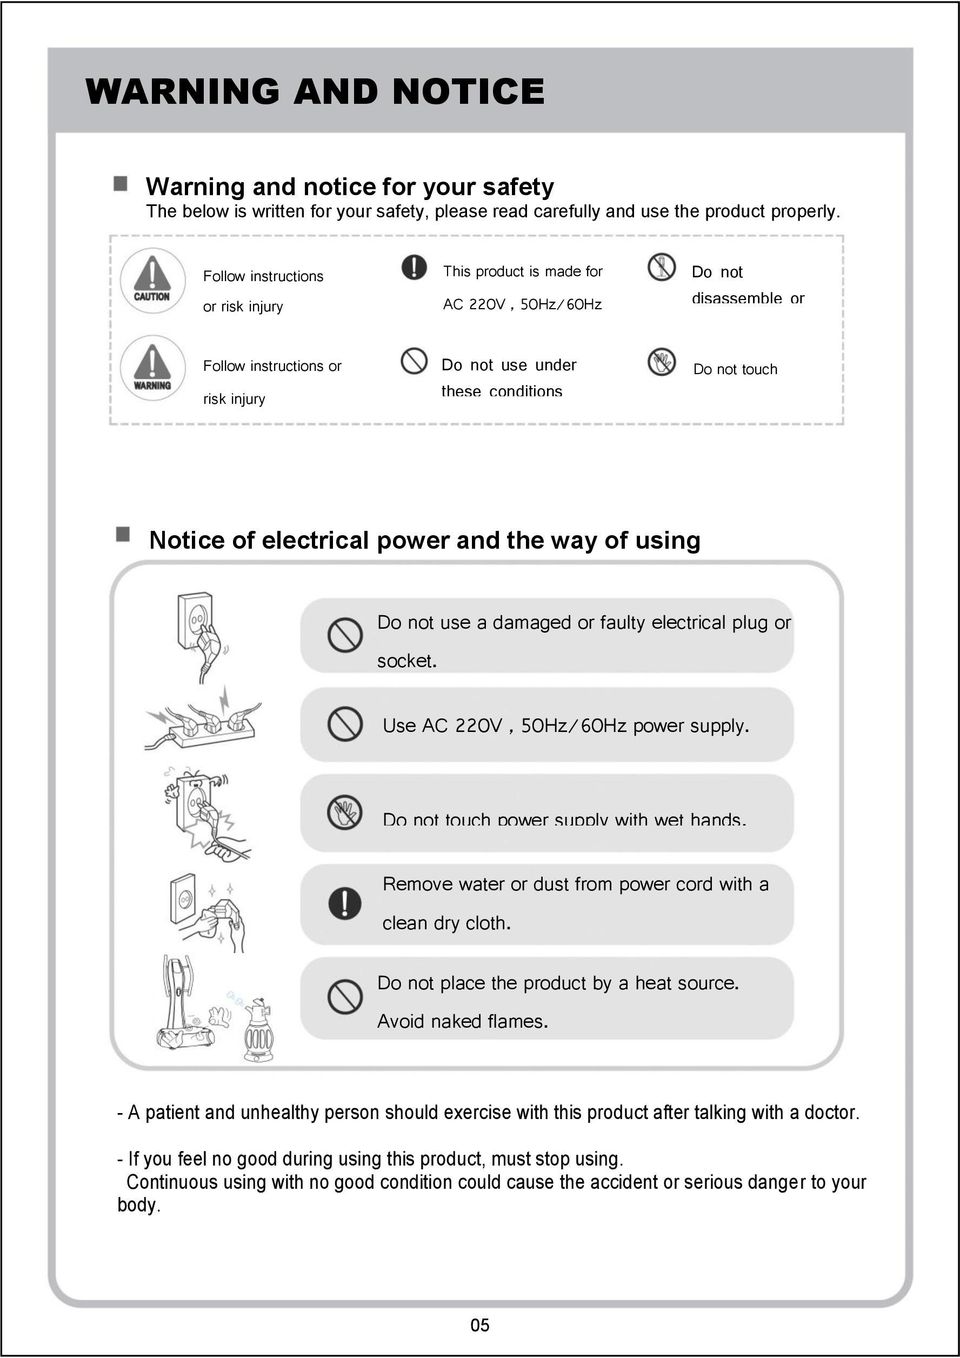 touch Notice of electrical power and the way of using Do not use a damaged or faulty electrical plug or socket. Use AC 220V, 50Hz/60Hz power supply. Avoid using a multi-board power device.